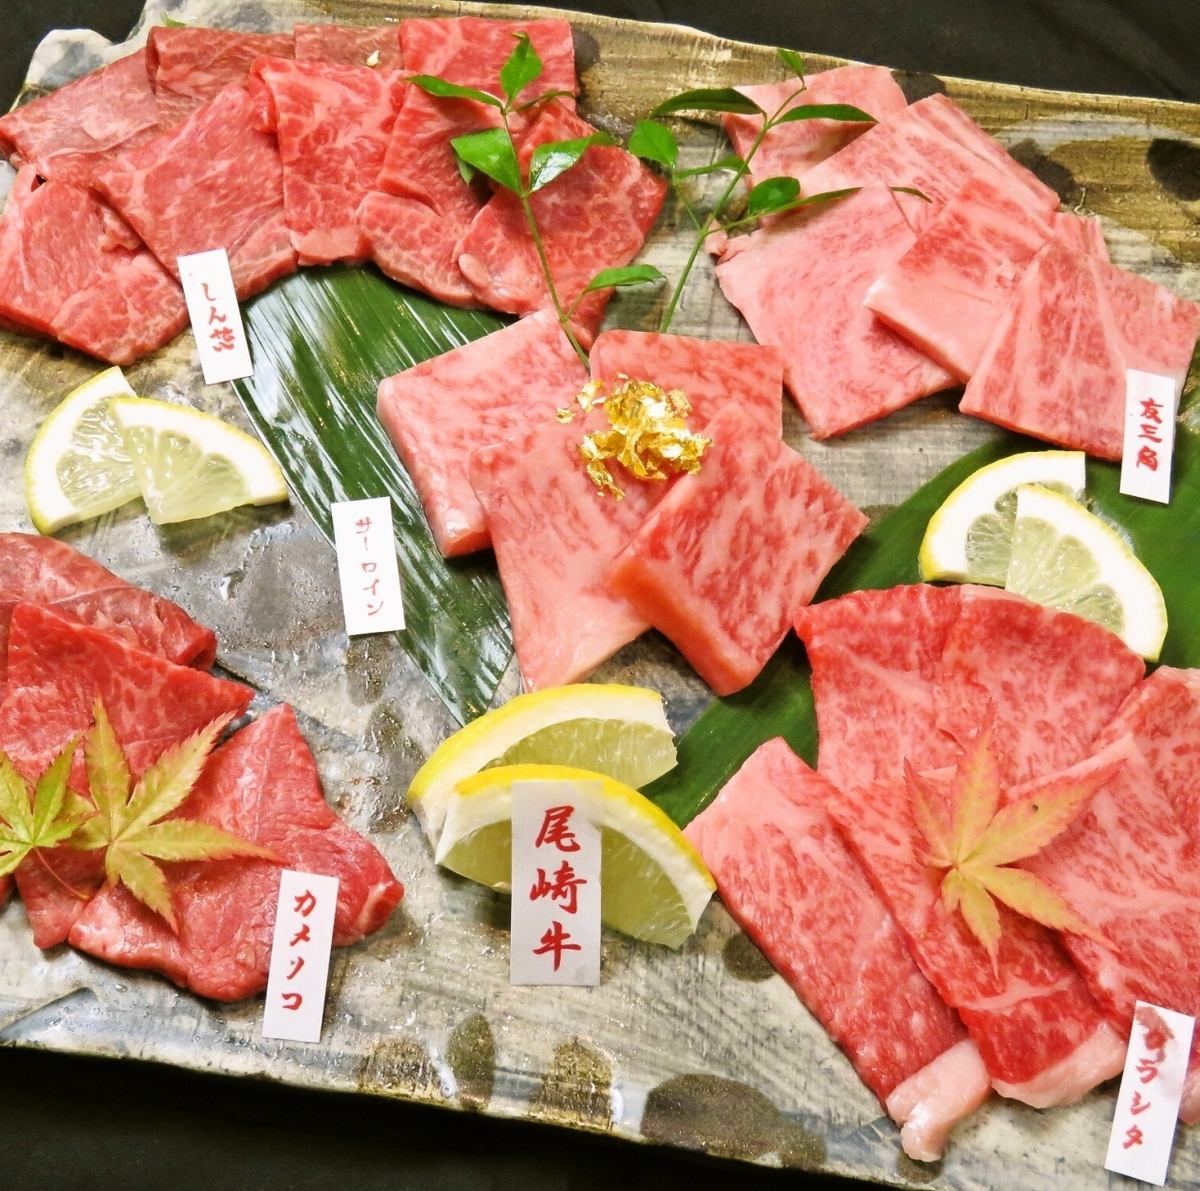 We offer courses starting at 7,000 yen, where you can enjoy Ozaki beef purchased as a whole.